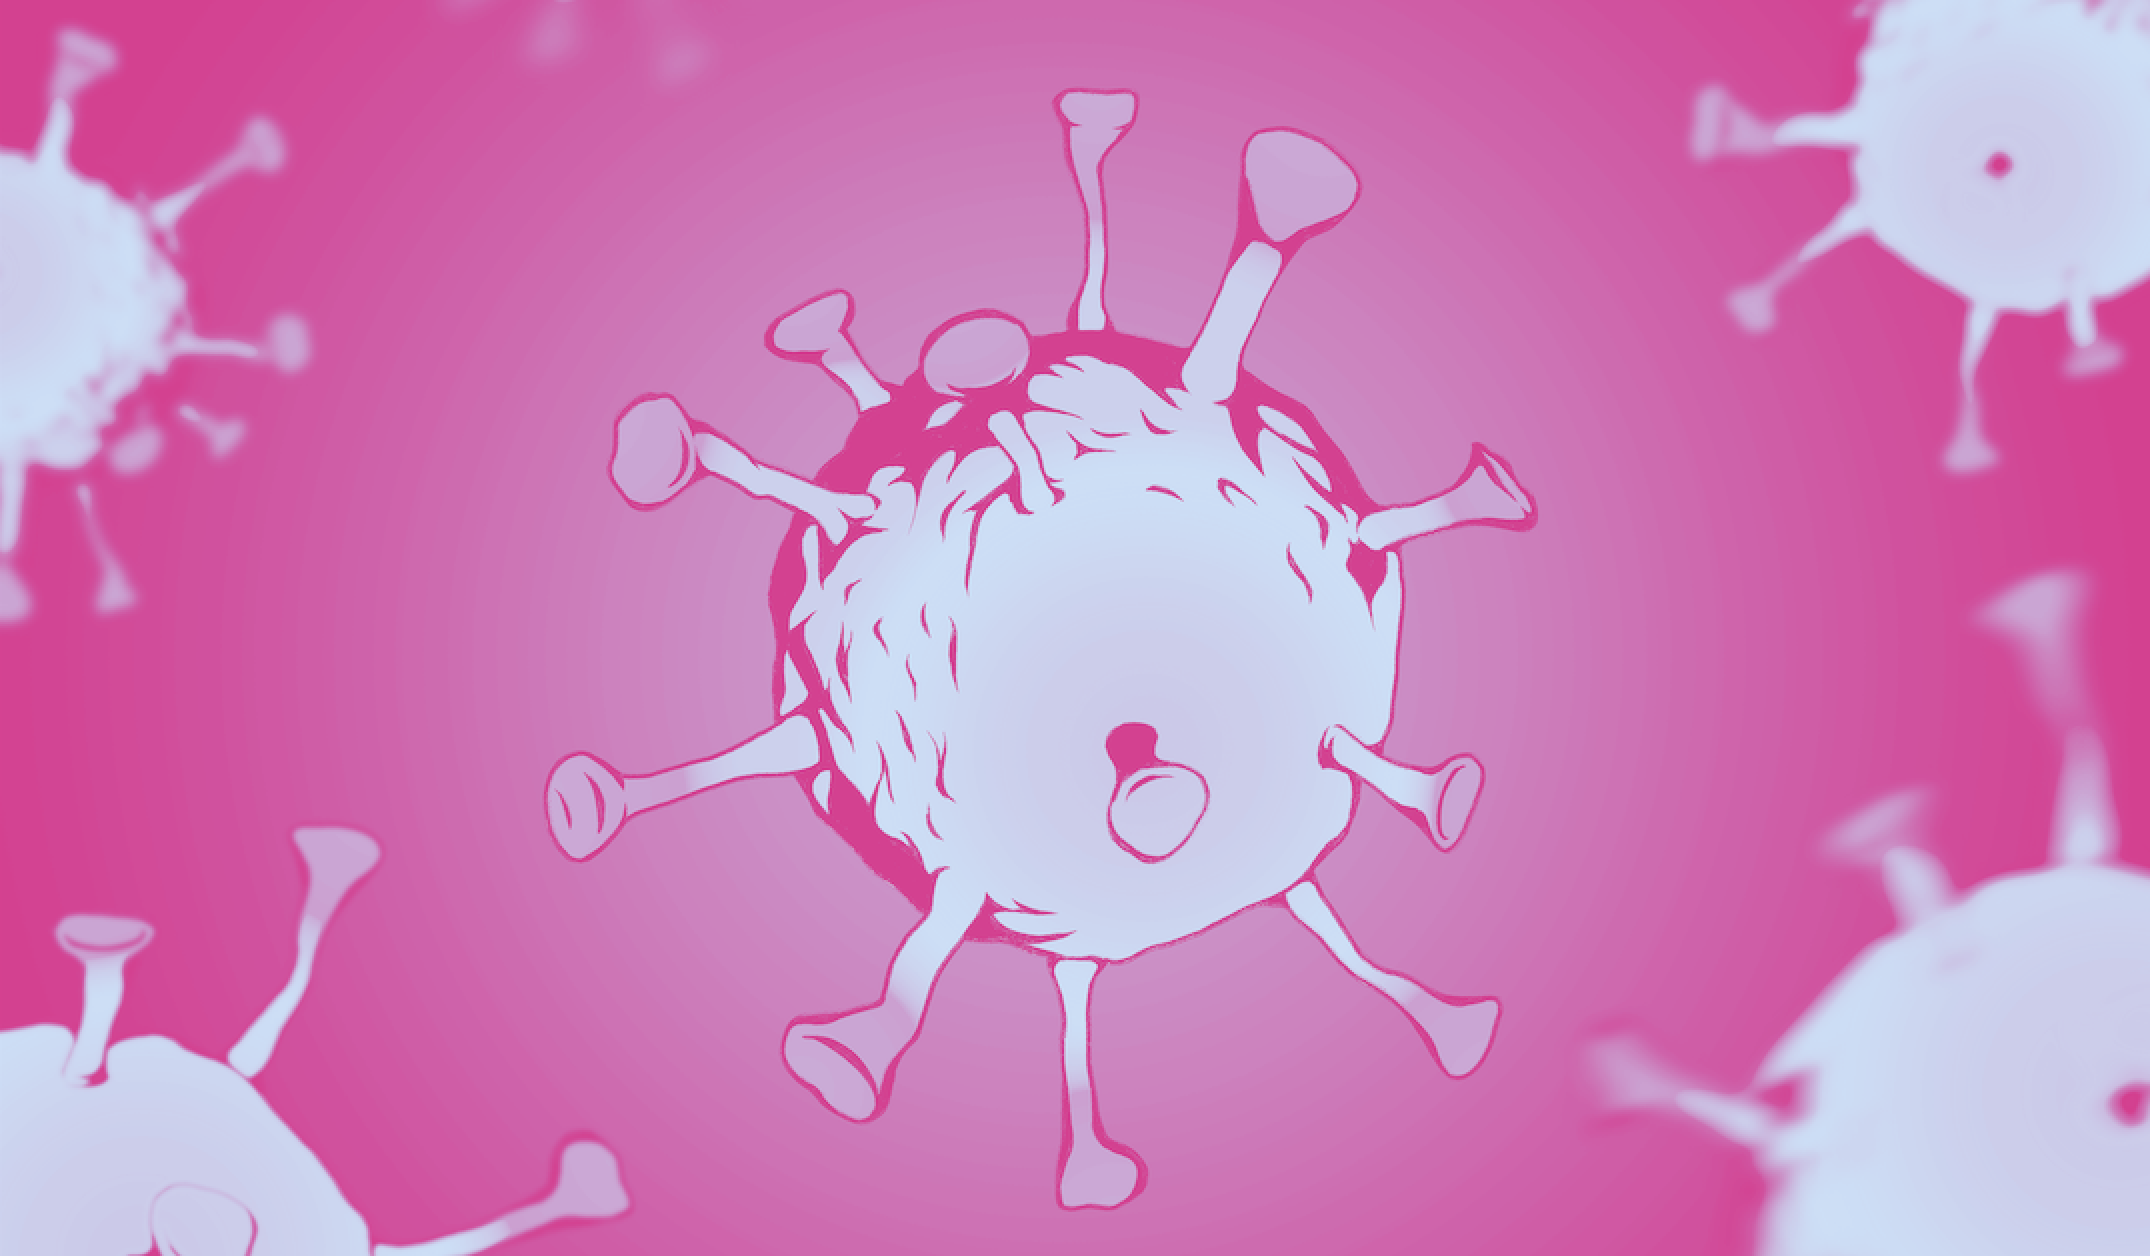 A SARS-CoV-2 virus, depicted in lilac against a magenta background